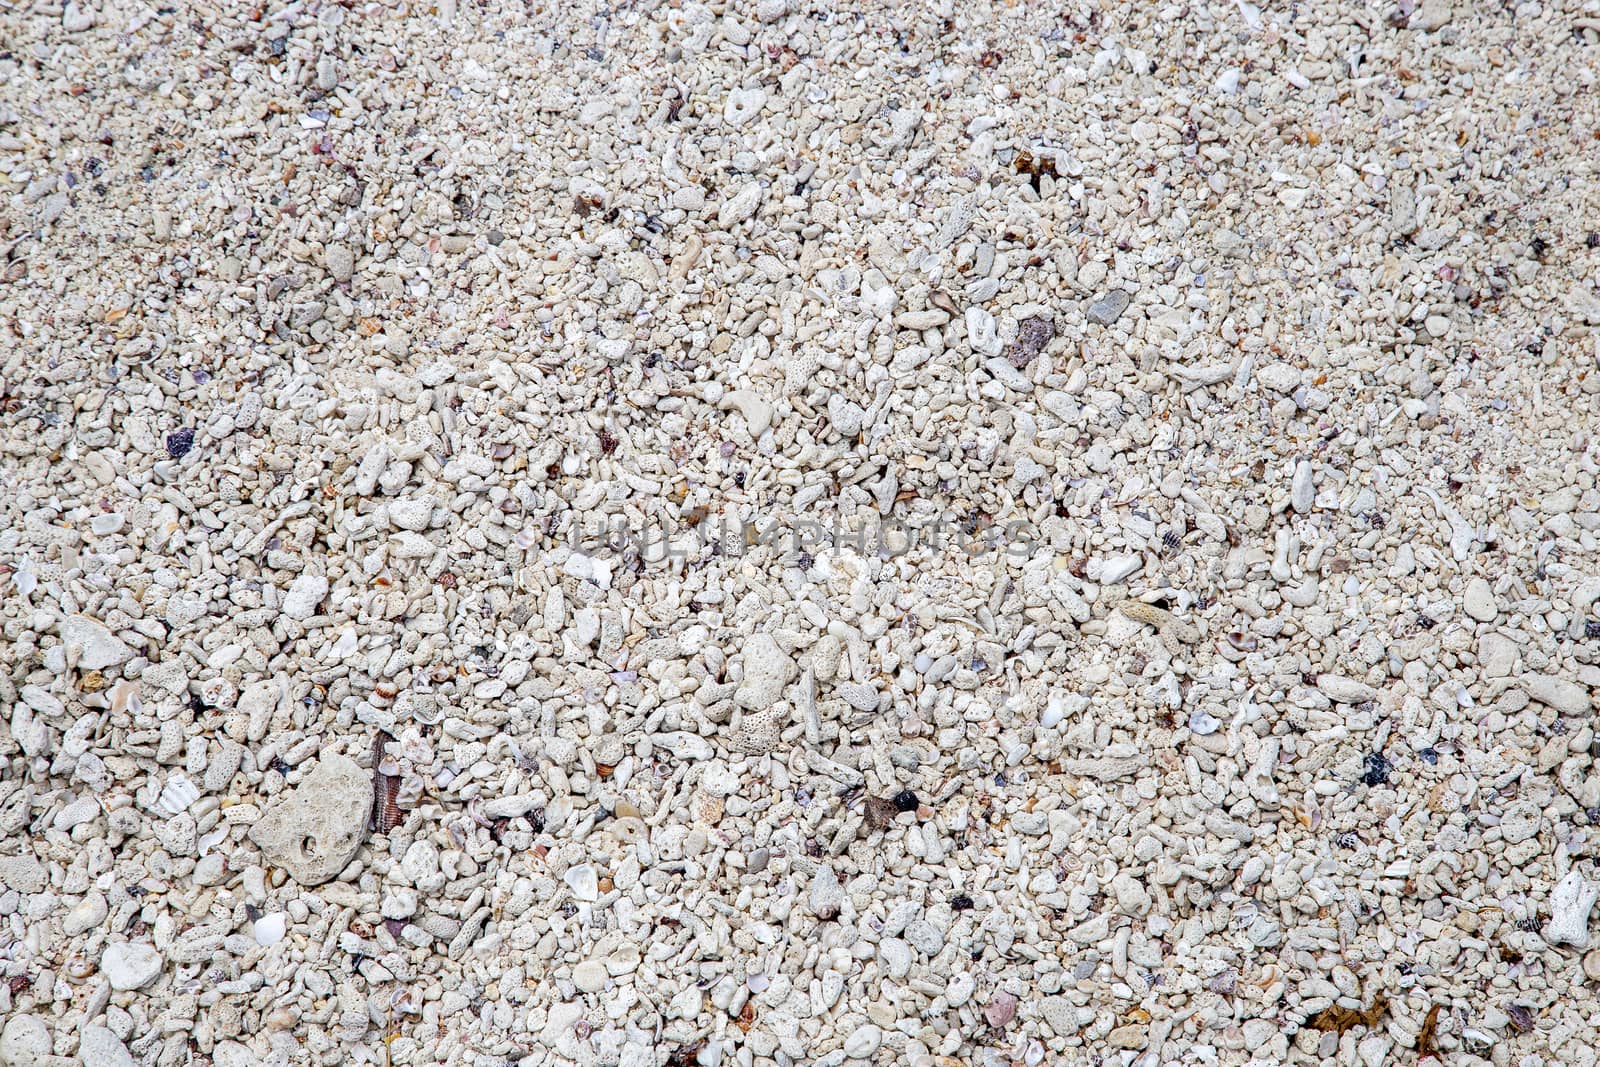 Background of shells, rocks and coral on beach